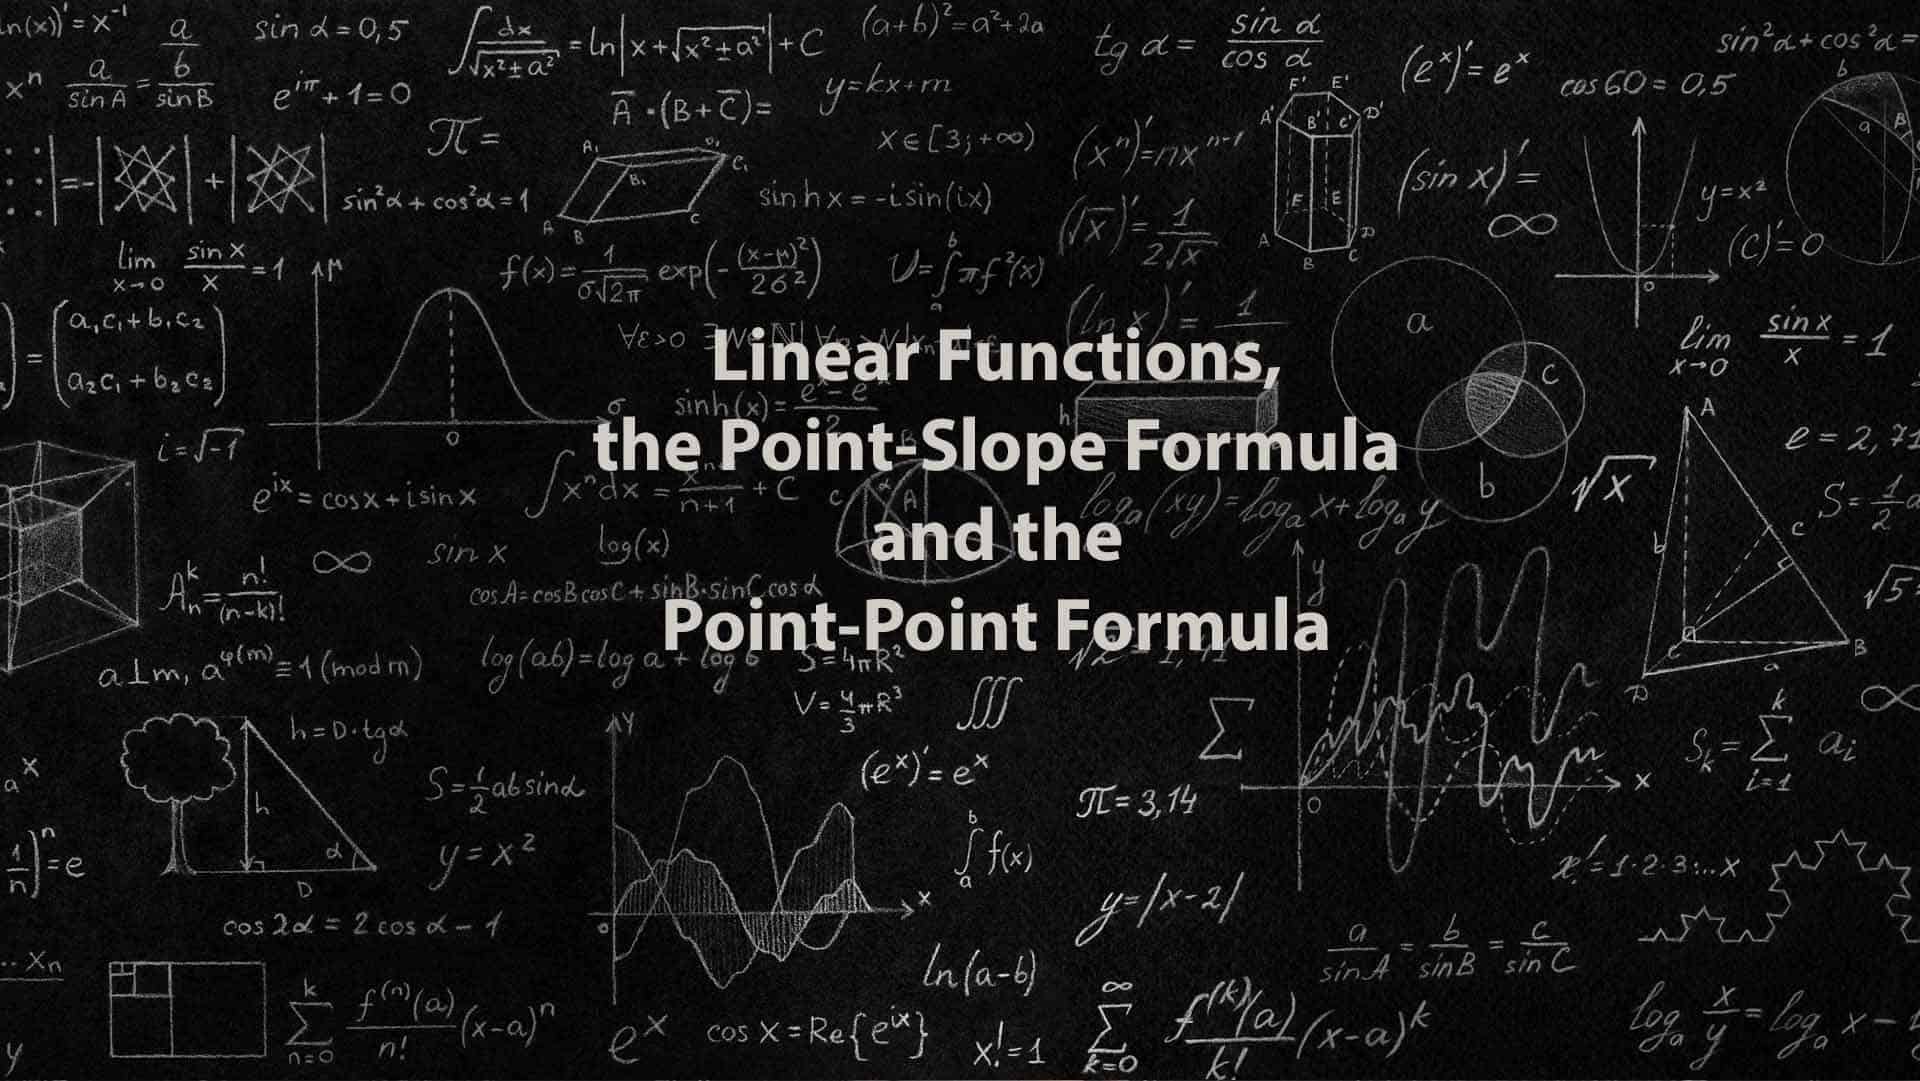 Mathematics 1 | Linear Functions, the Point-Slope Formula and the Point-Point Formula